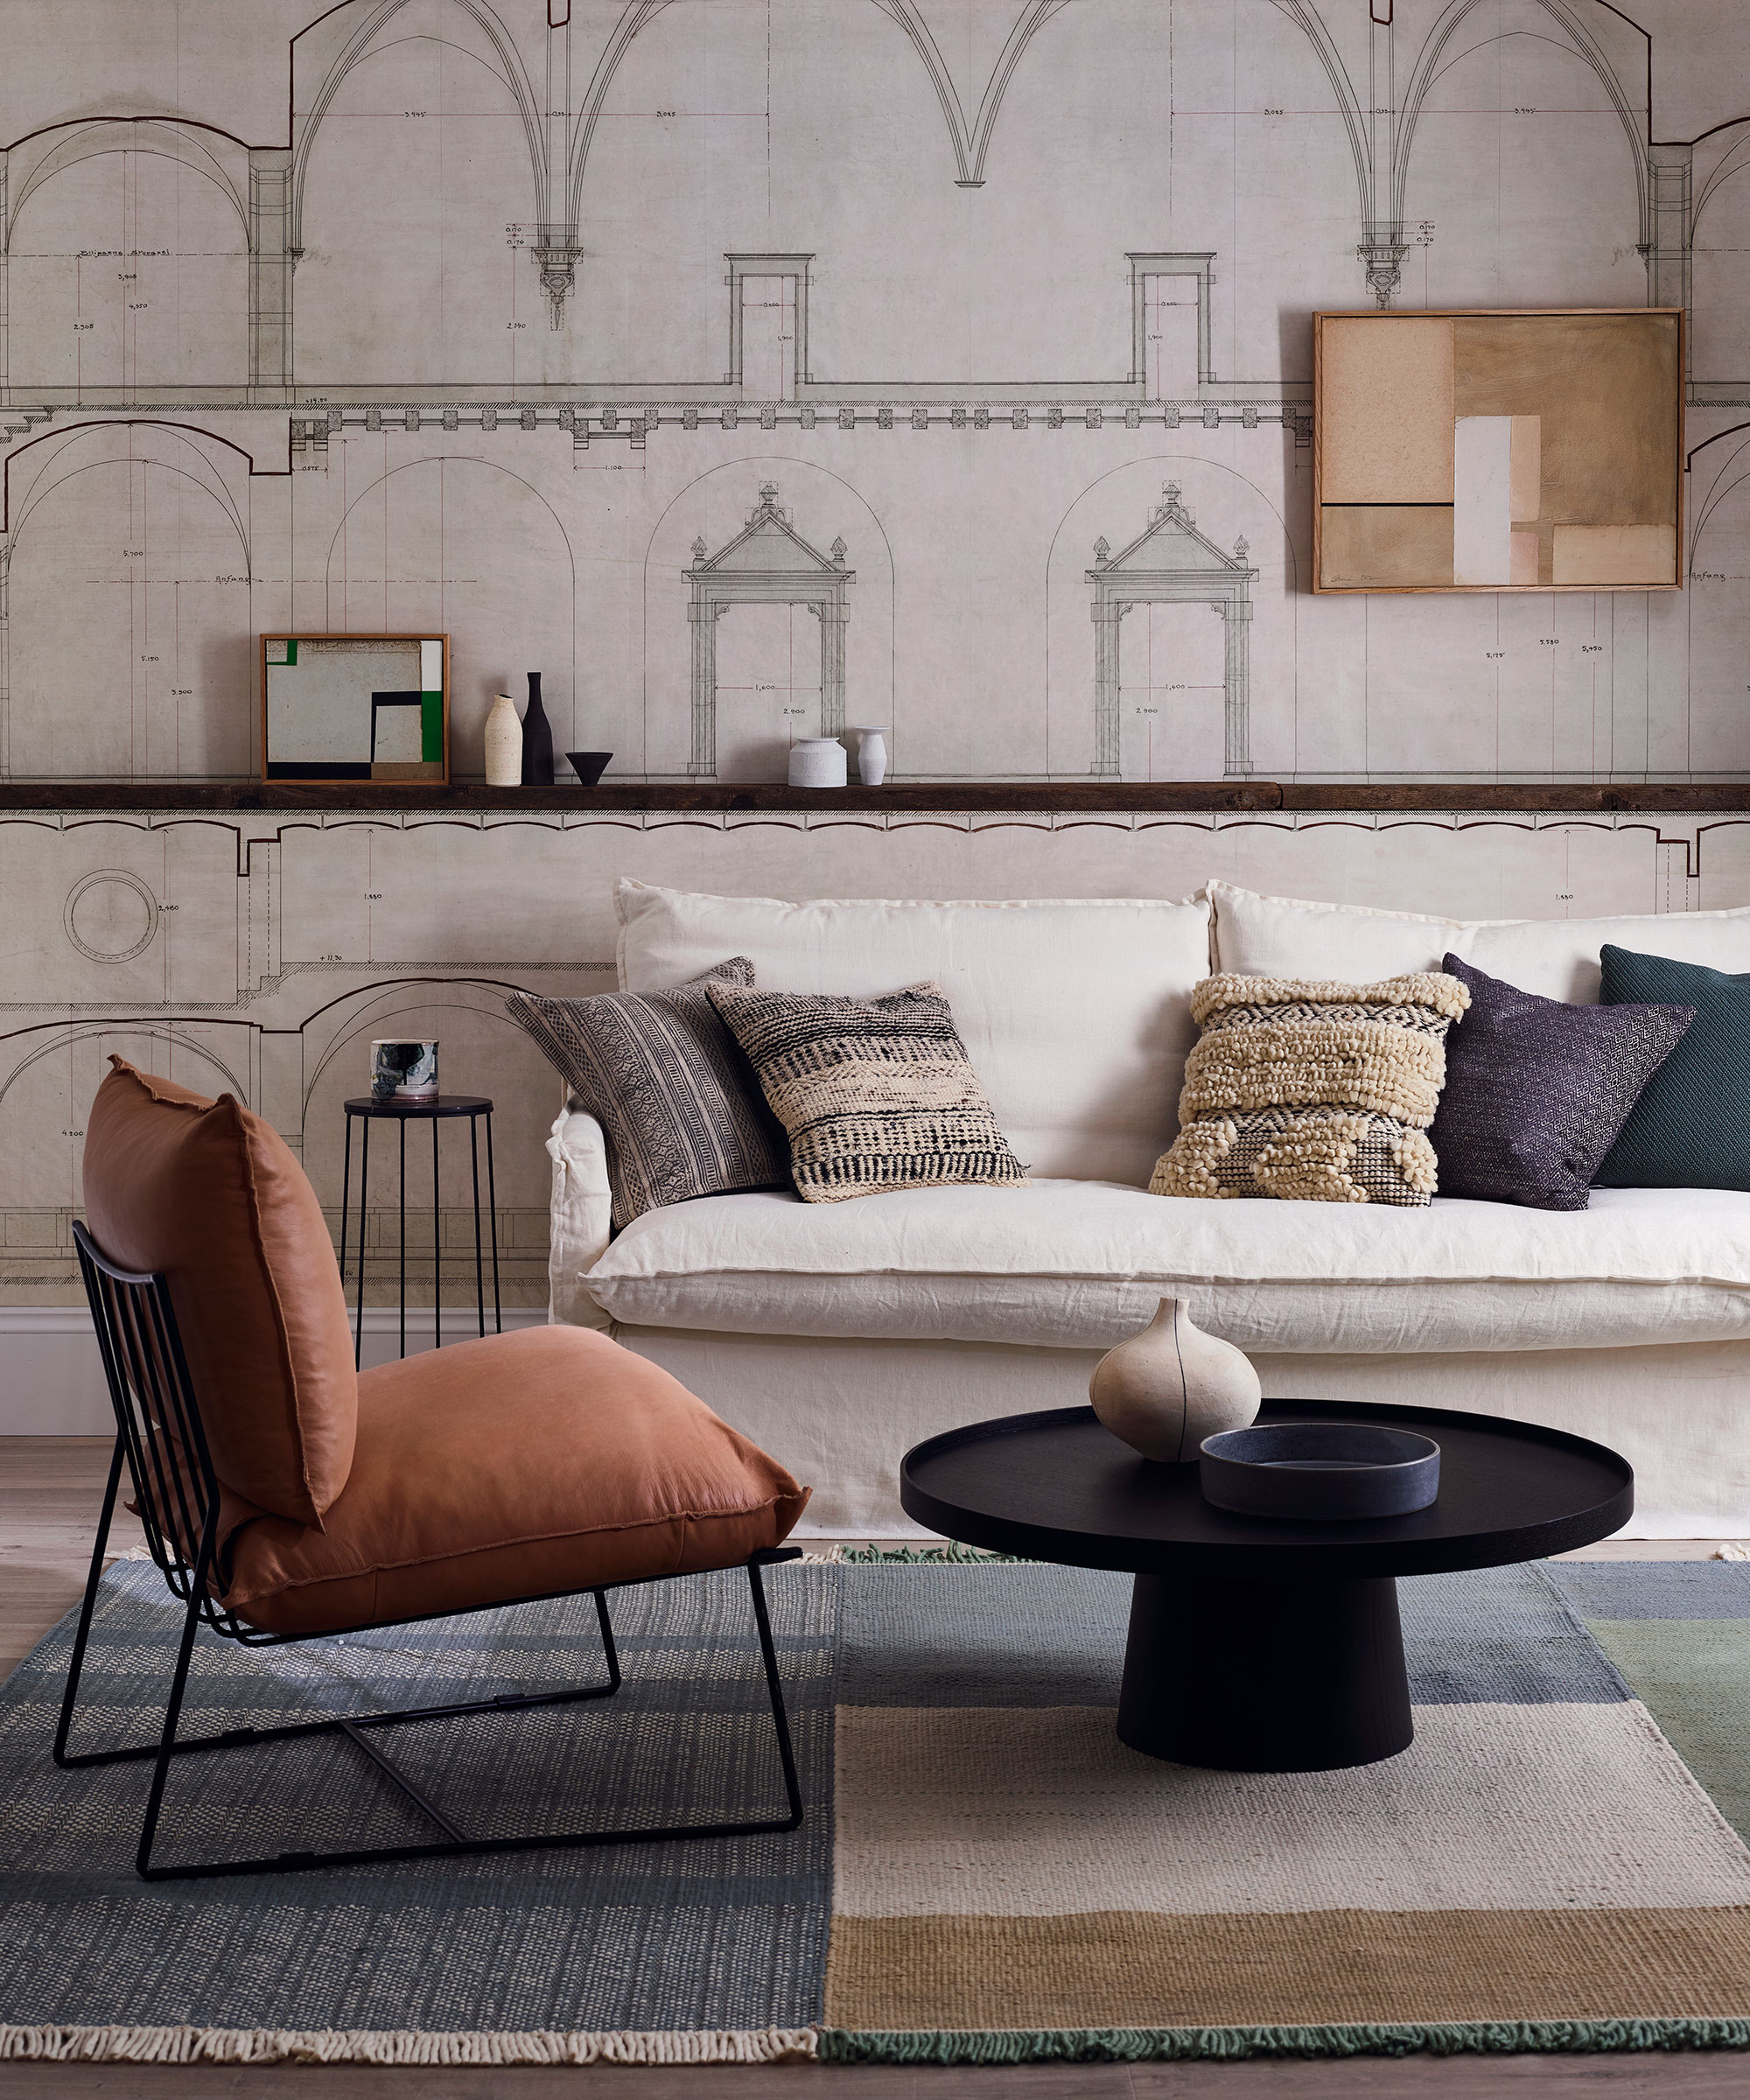 Living room ideas featuring an architectural mural and a scheme with neutral, muted furnishings